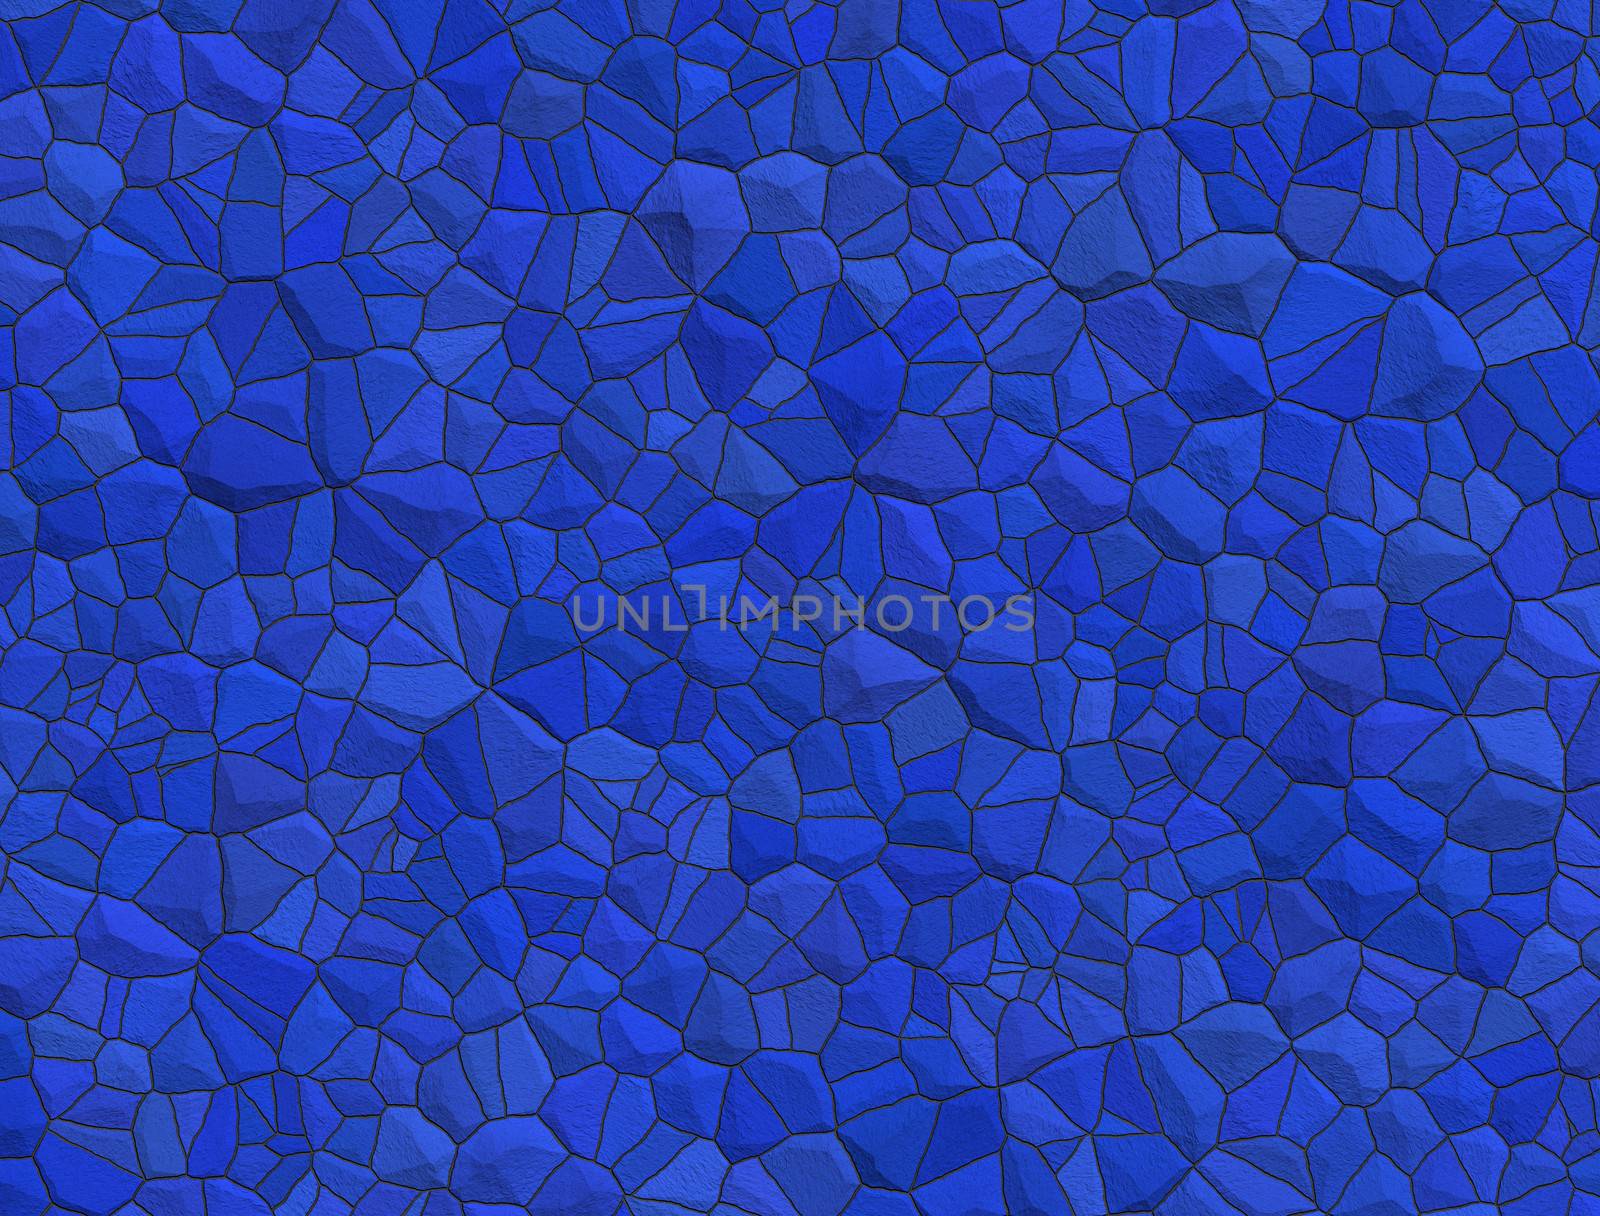 Abstract background with tiles in blue